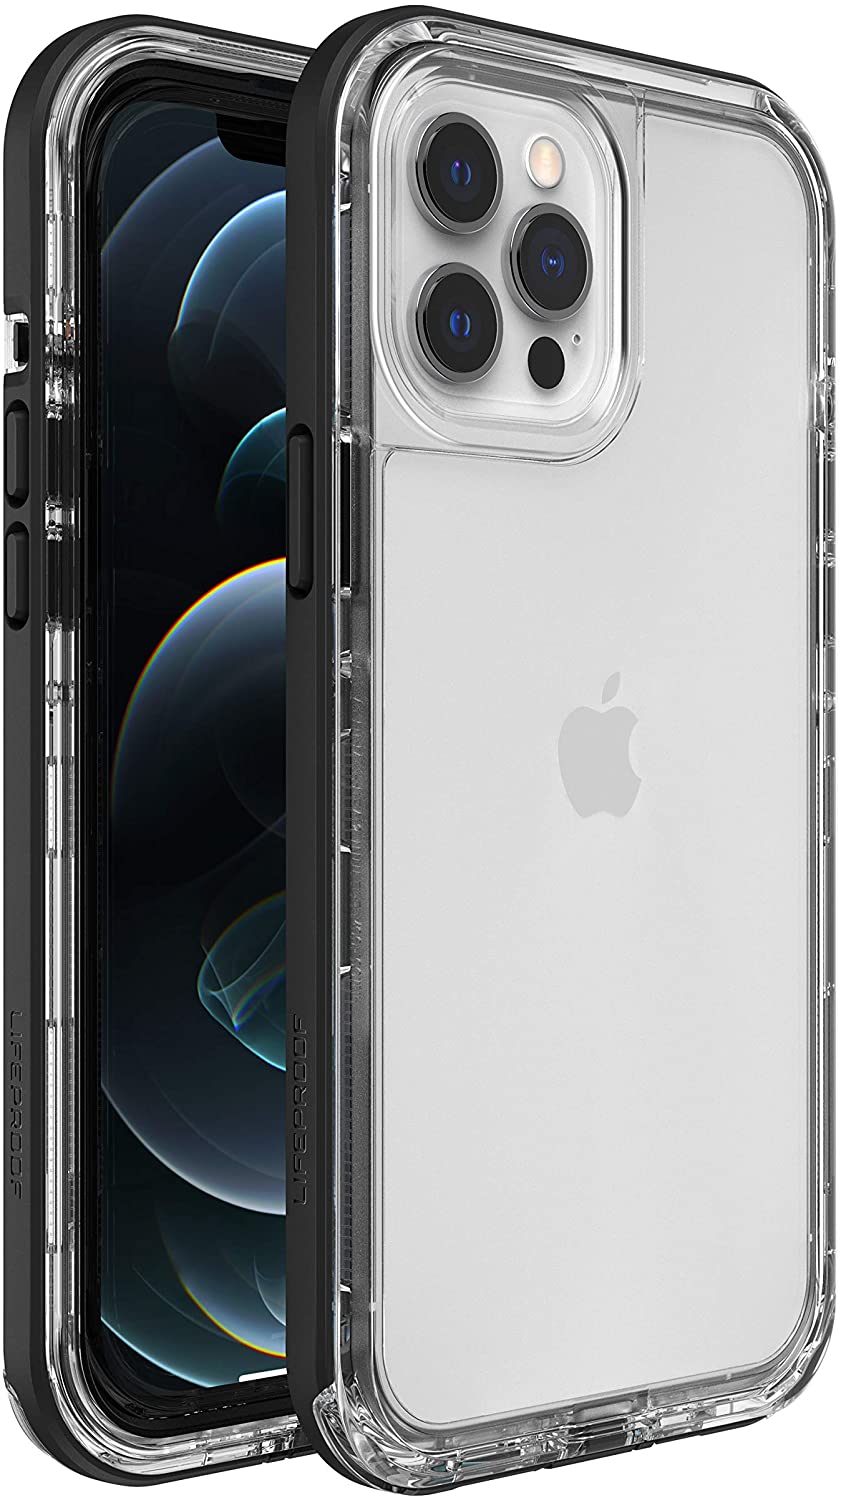 LifeProof NEXT SERIES Case for Apple iPhone 12 Pro Max - Black Crystal (Certified Refurbished)